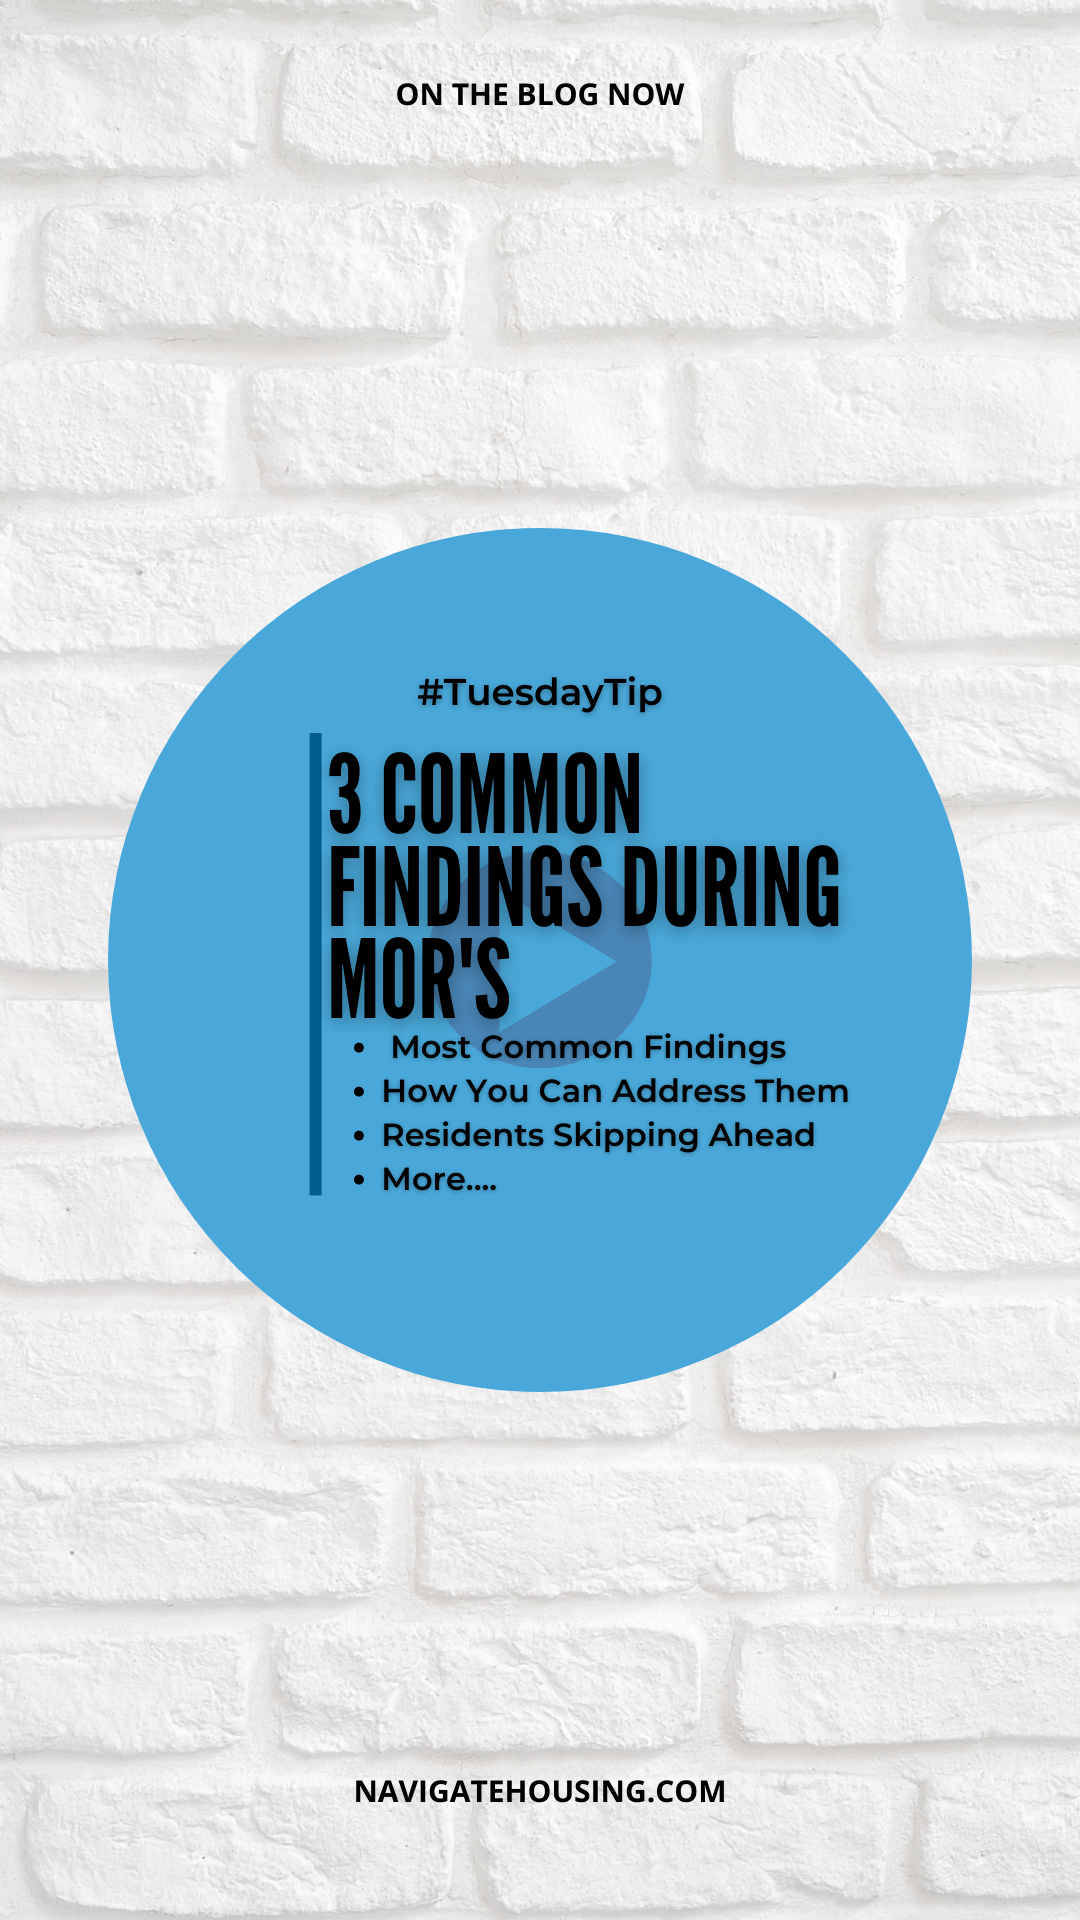 TuesdayTip: 3 Common Findings During MOR's